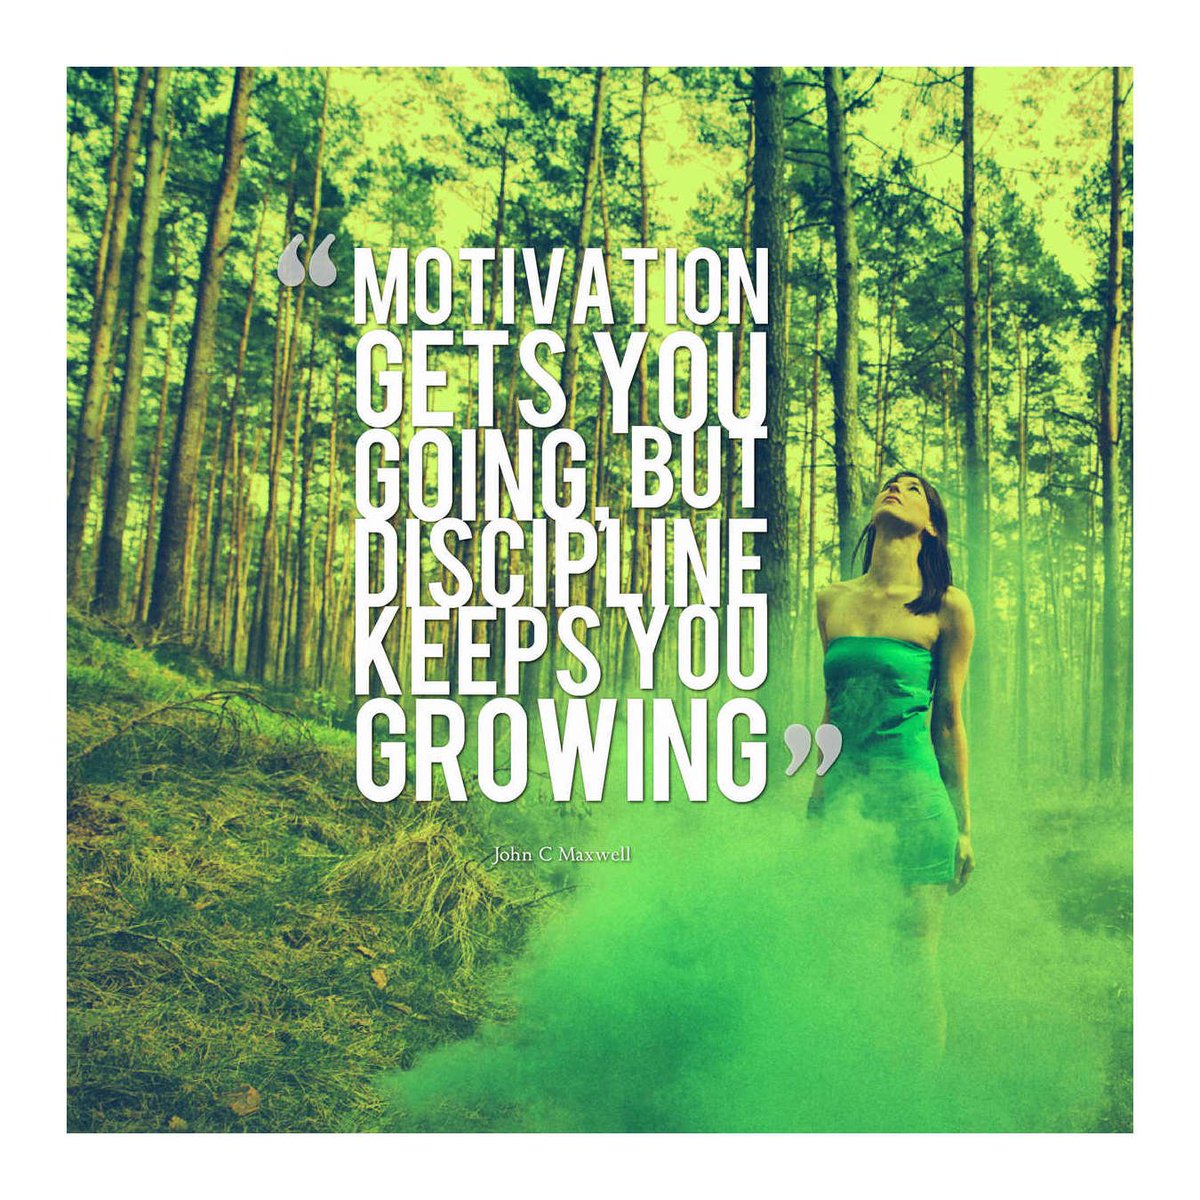 Motivation gets you going but Discipline keeps you growing - #JohnMaxwell
#motivationalquotes #motivation #success #quotes #quotesoftheday #courage #life #achivement #hustler #desire #dreams #curiosity #curious #Responsibility #Fault #fear #Idea #LifeLessons #CreatingSuccess